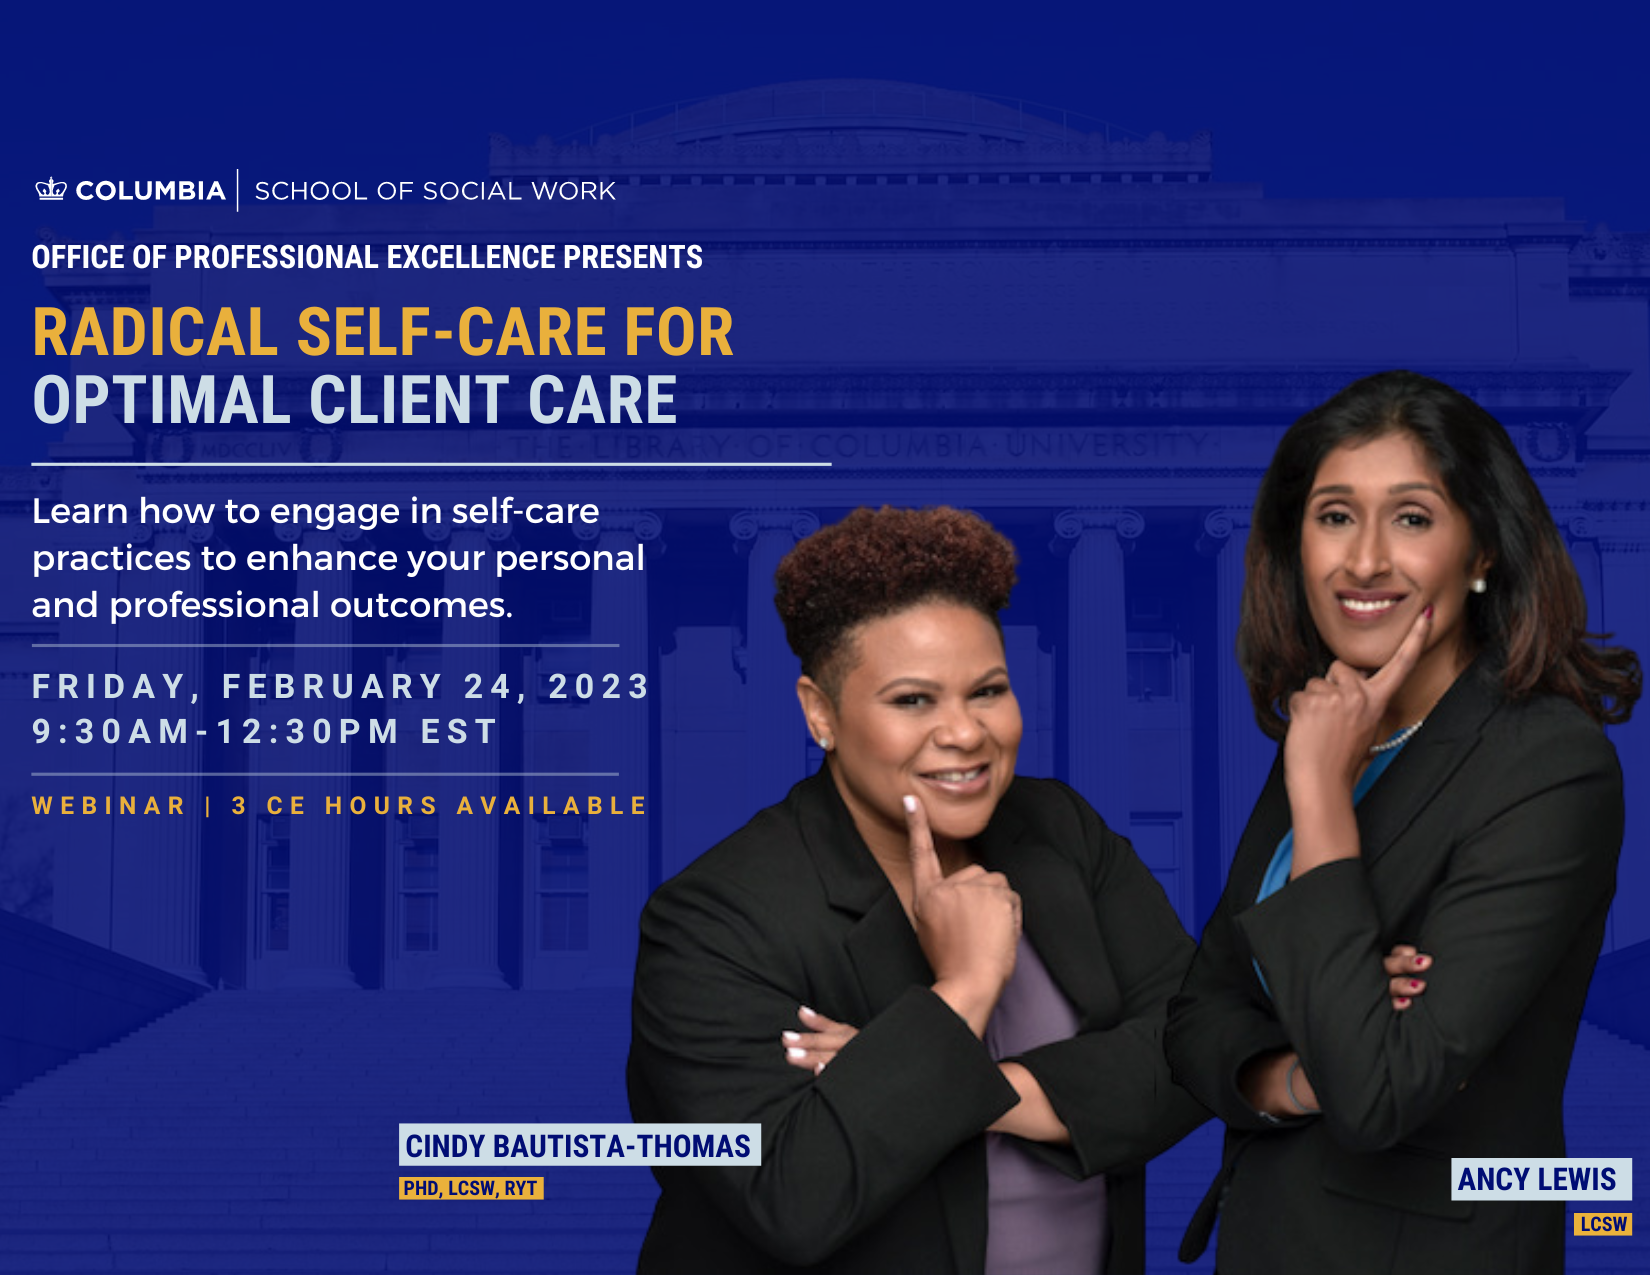 Radical Self-Care for Optimal Client Care Event information with headshots of Cindy Bautista-Thomas and Ancy Lewis 